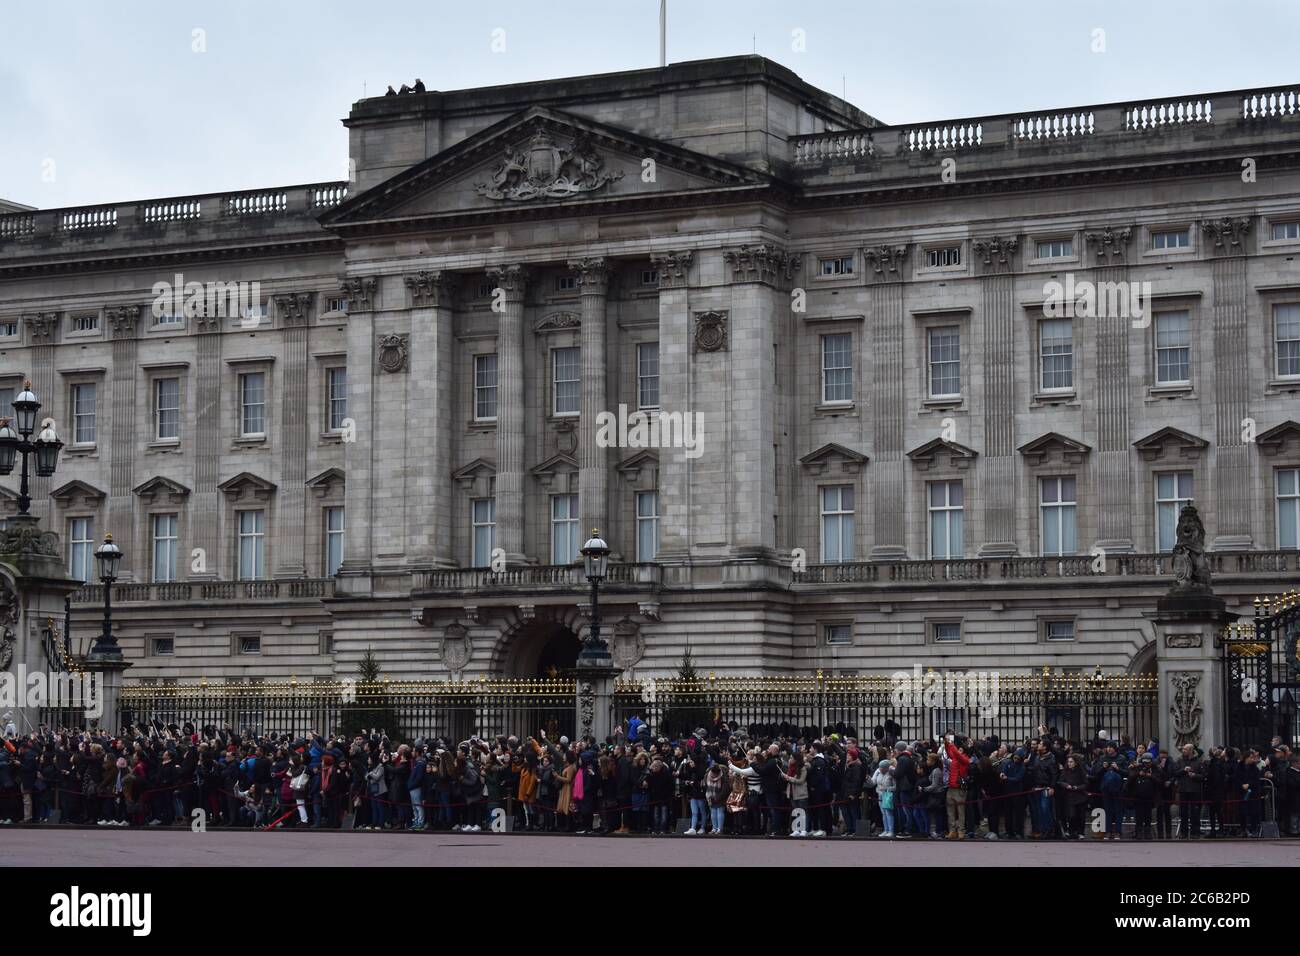 Crowds gather outside Buckingham Palace for the Changing Of The Guard Ceremony.  The imposing east facade and balcony for royal appearances. Stock Photo